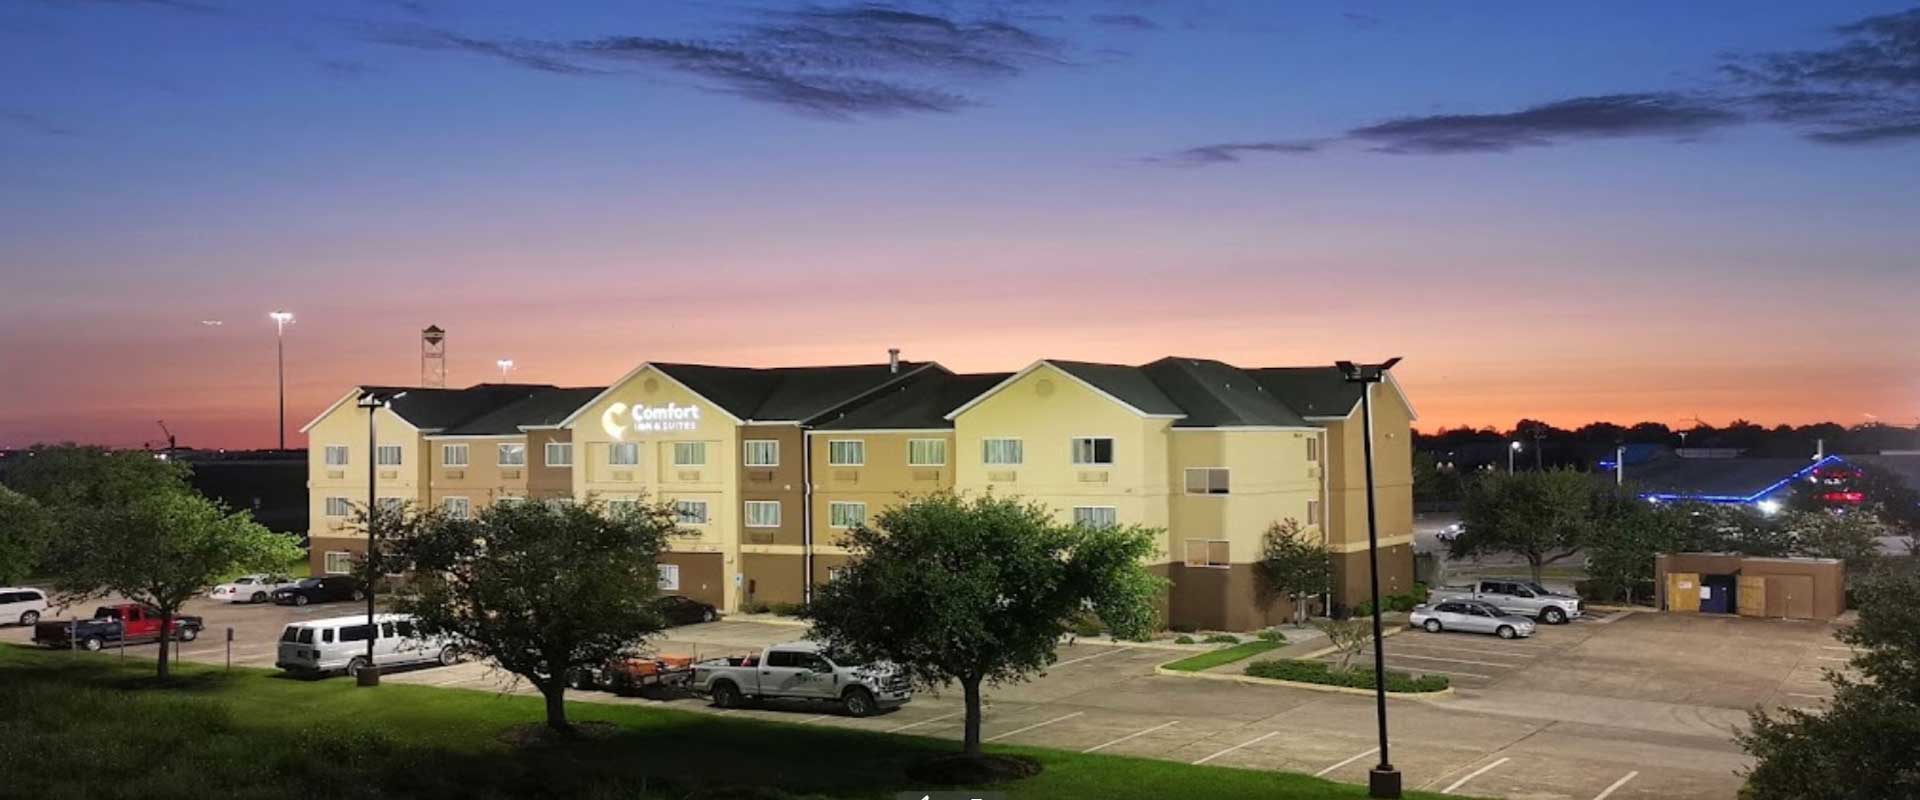 Comfort Inn & Suites | Texas City Budget Affordable Lodging